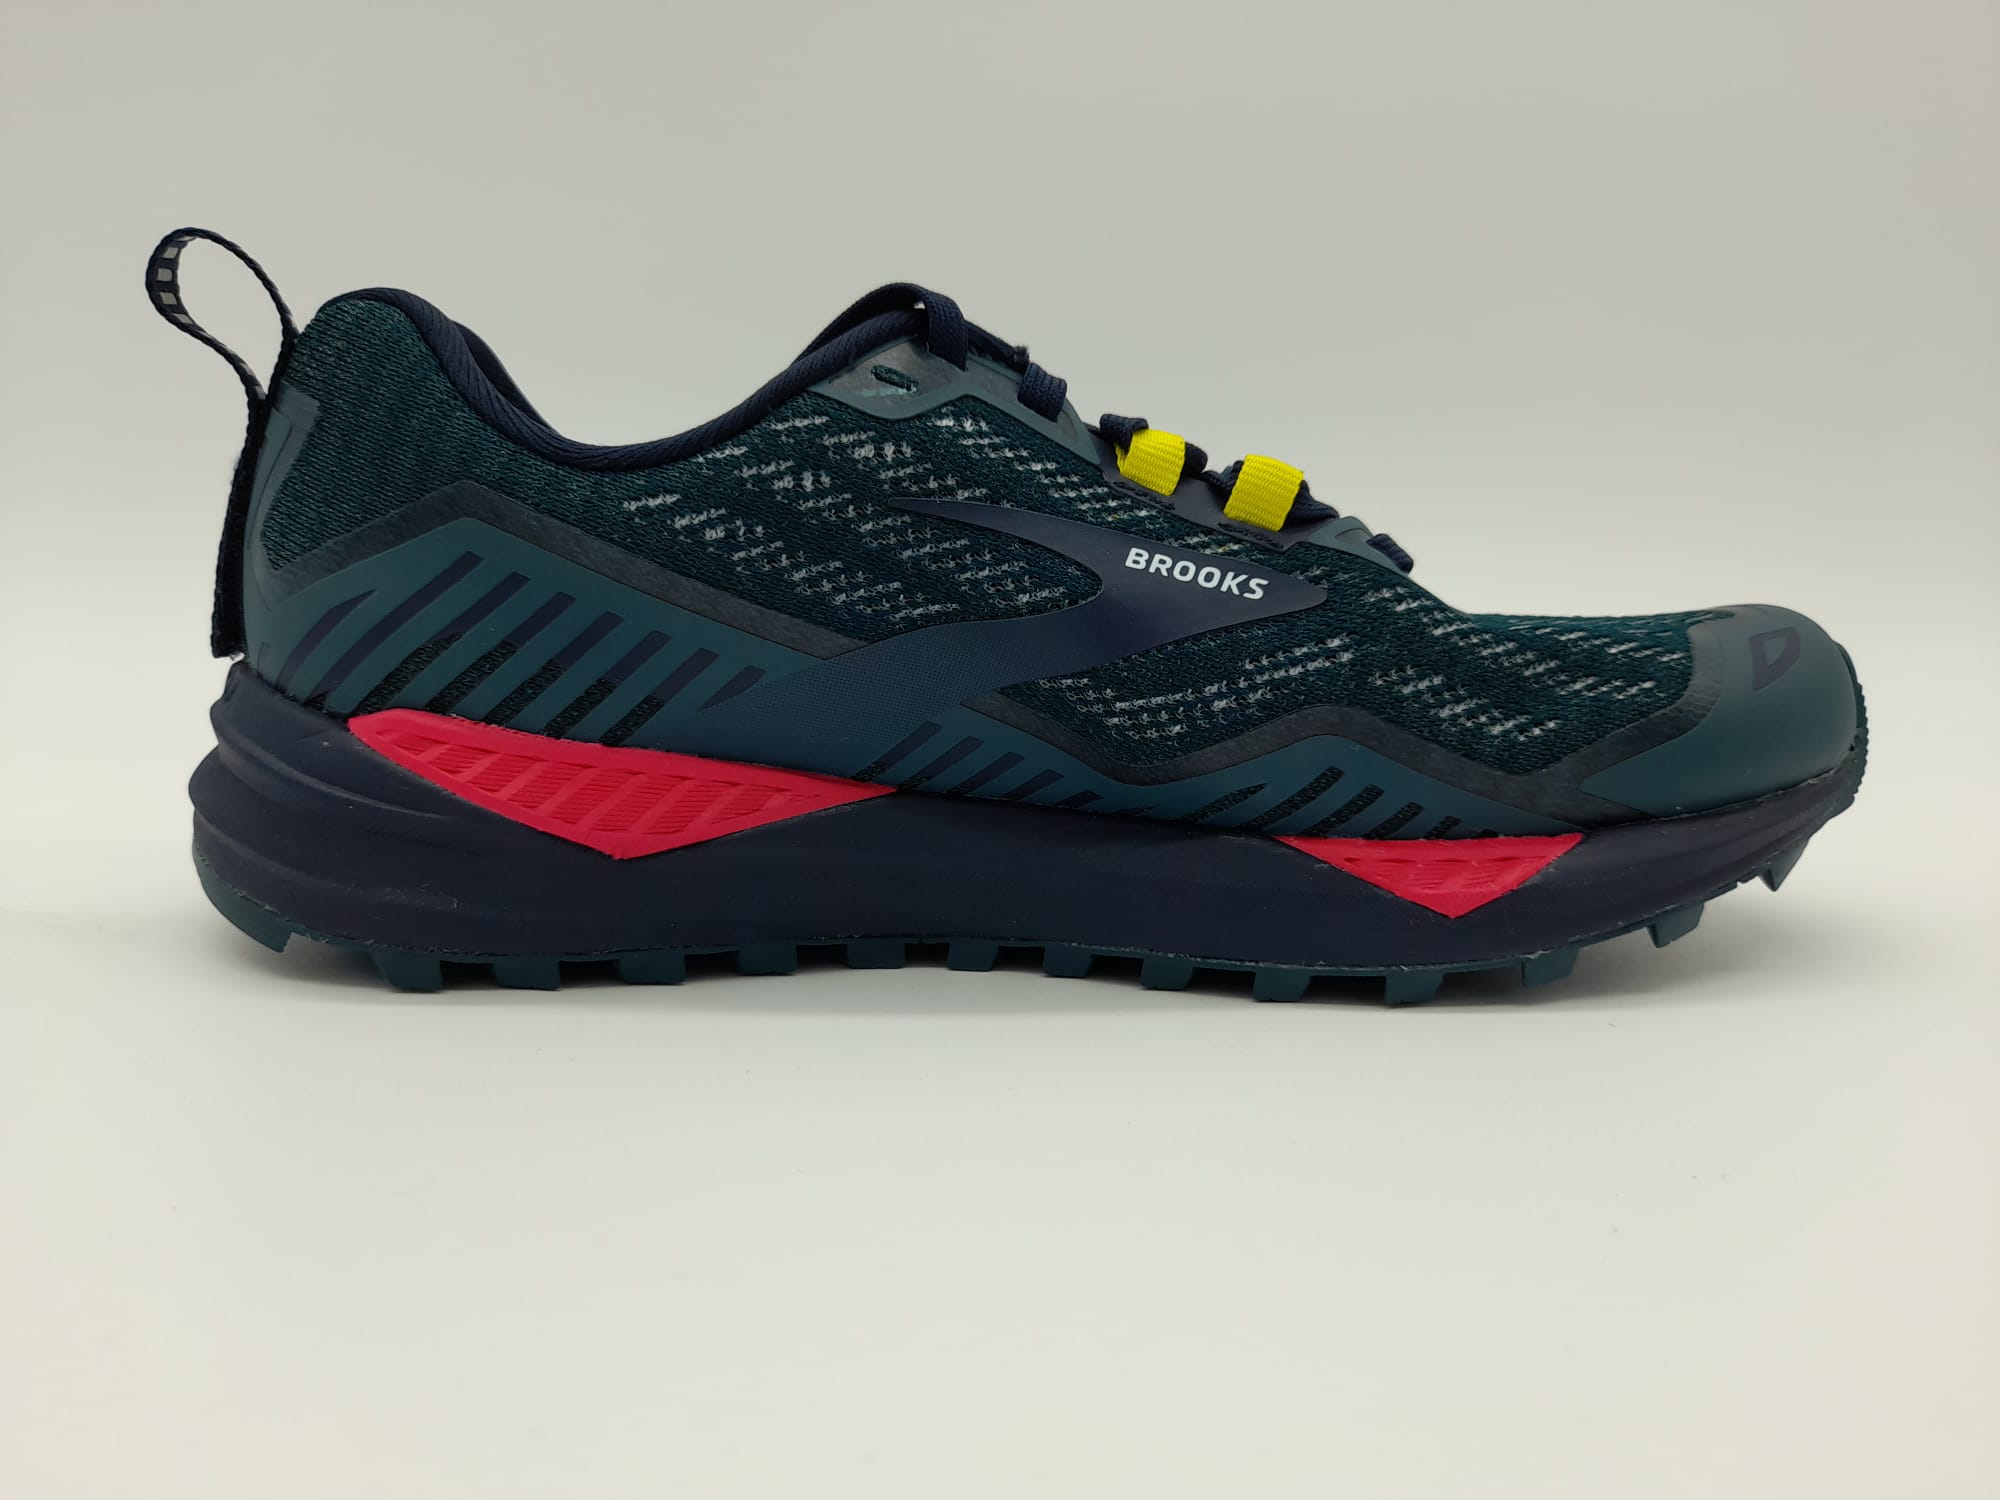 ZAPATILLA TRAIL RUNNING MUJER/OUTLET BROOKS CASCADIA 15 W